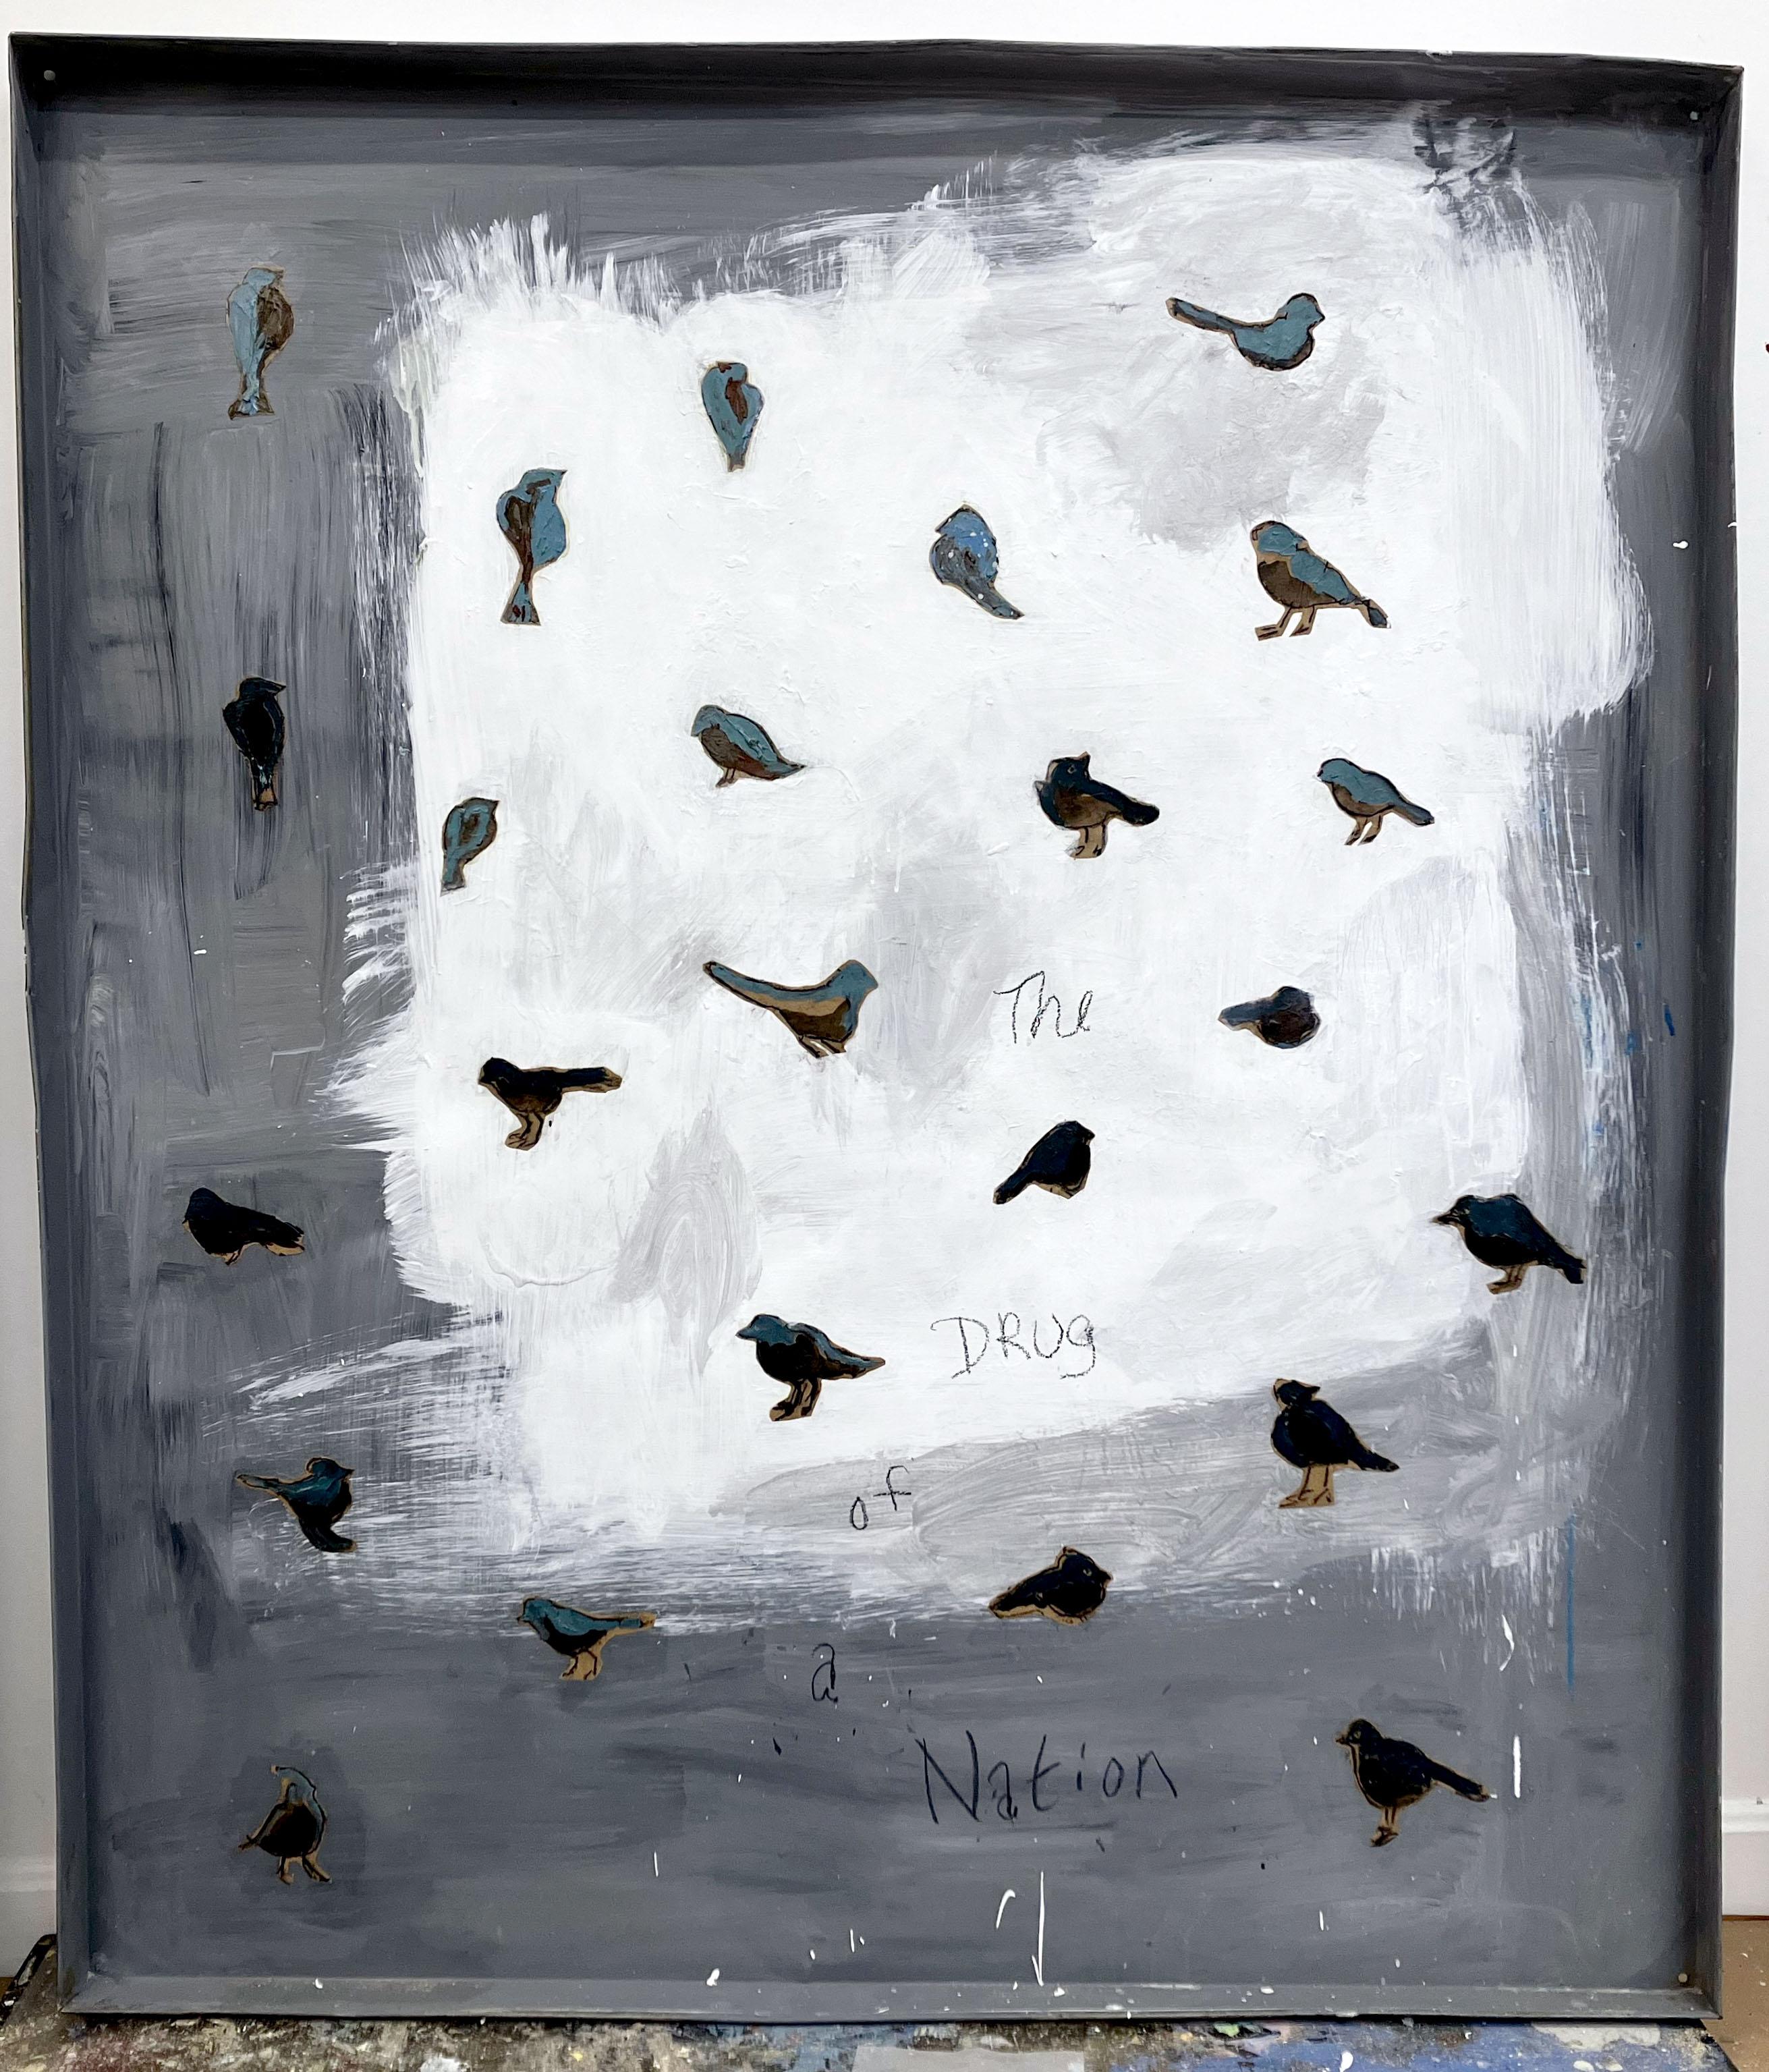 C. Dimitri Abstract Painting - Bluebirds I, grey and white composition, abstracted with text "Drug of a Nation"